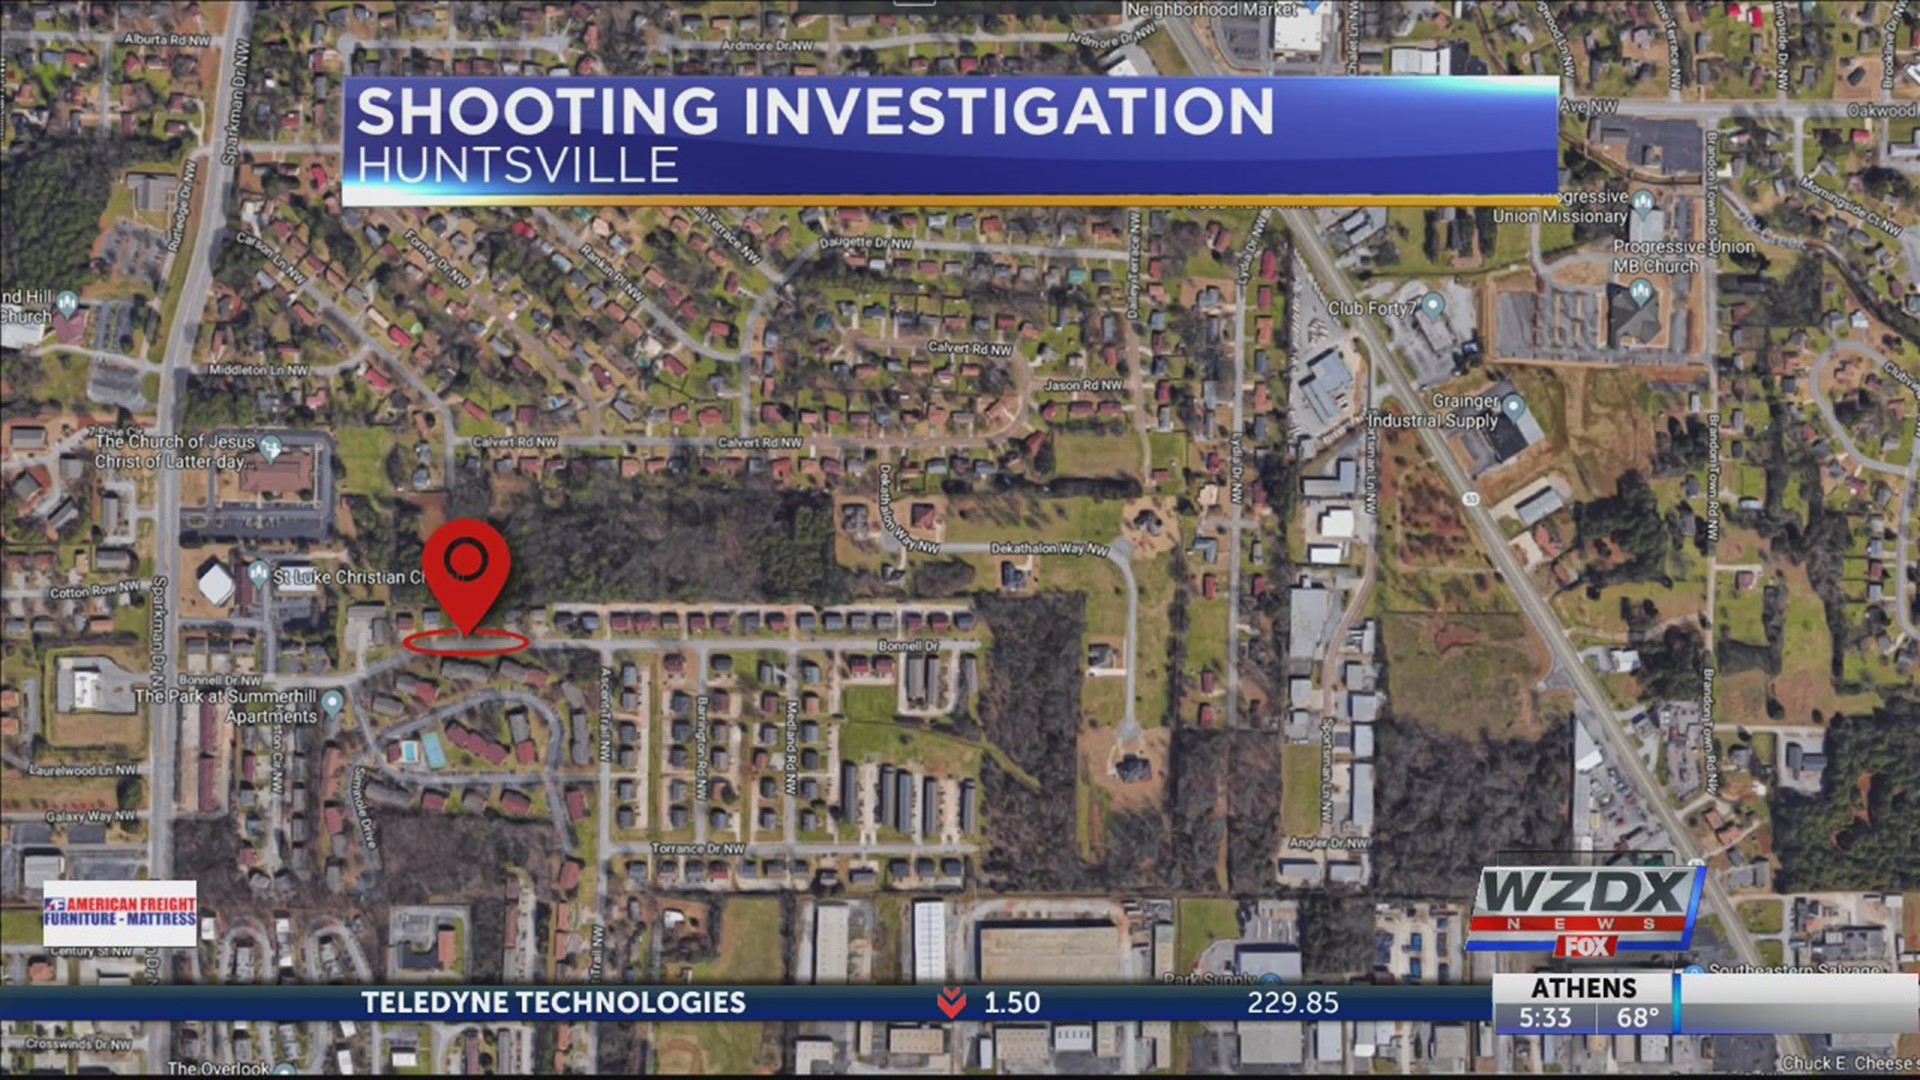 Huntsville Police are investigating a shooting that allegedly happened when a man met up with an ex-girlfriend to get belongings back and was shot in the chest by another man. He is expected to survive.